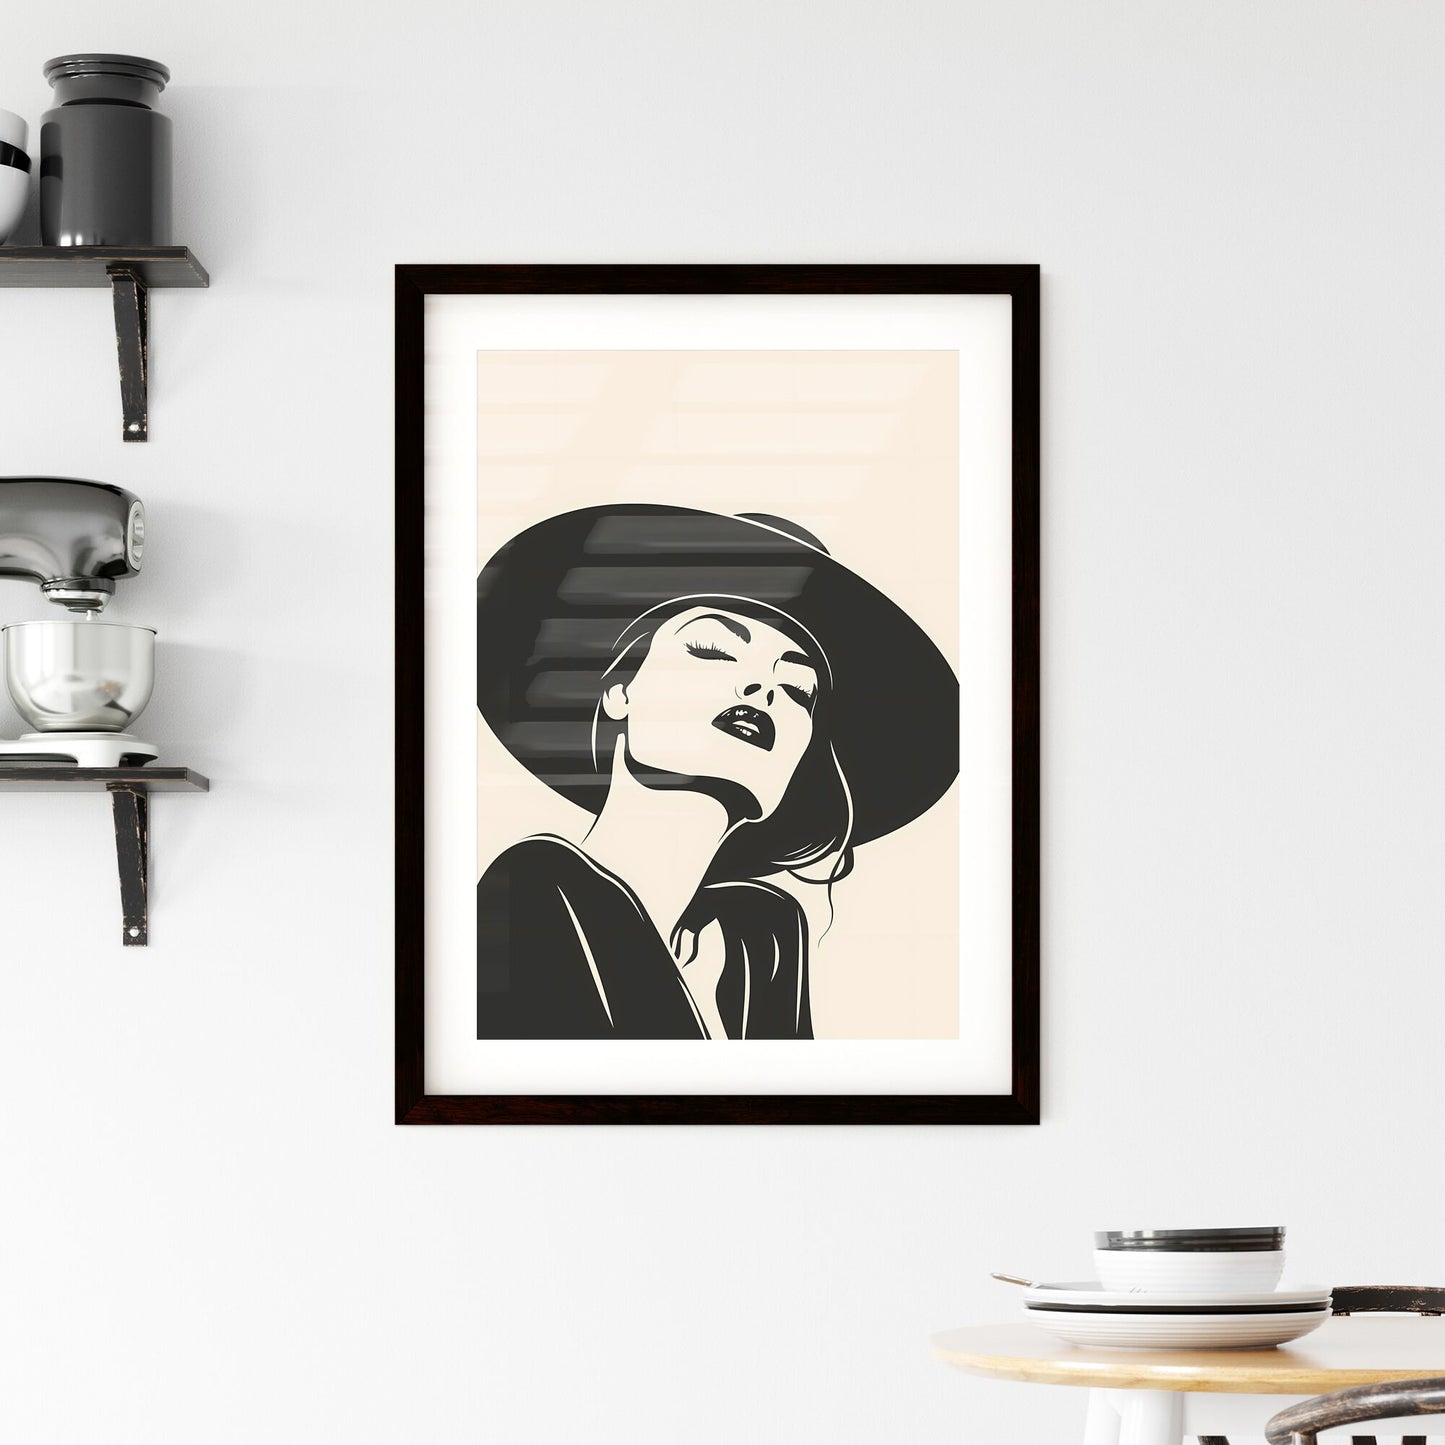 Minimalist Retro Fashion Art Poster: Black and White Illustration of a Hatted Woman Default Title